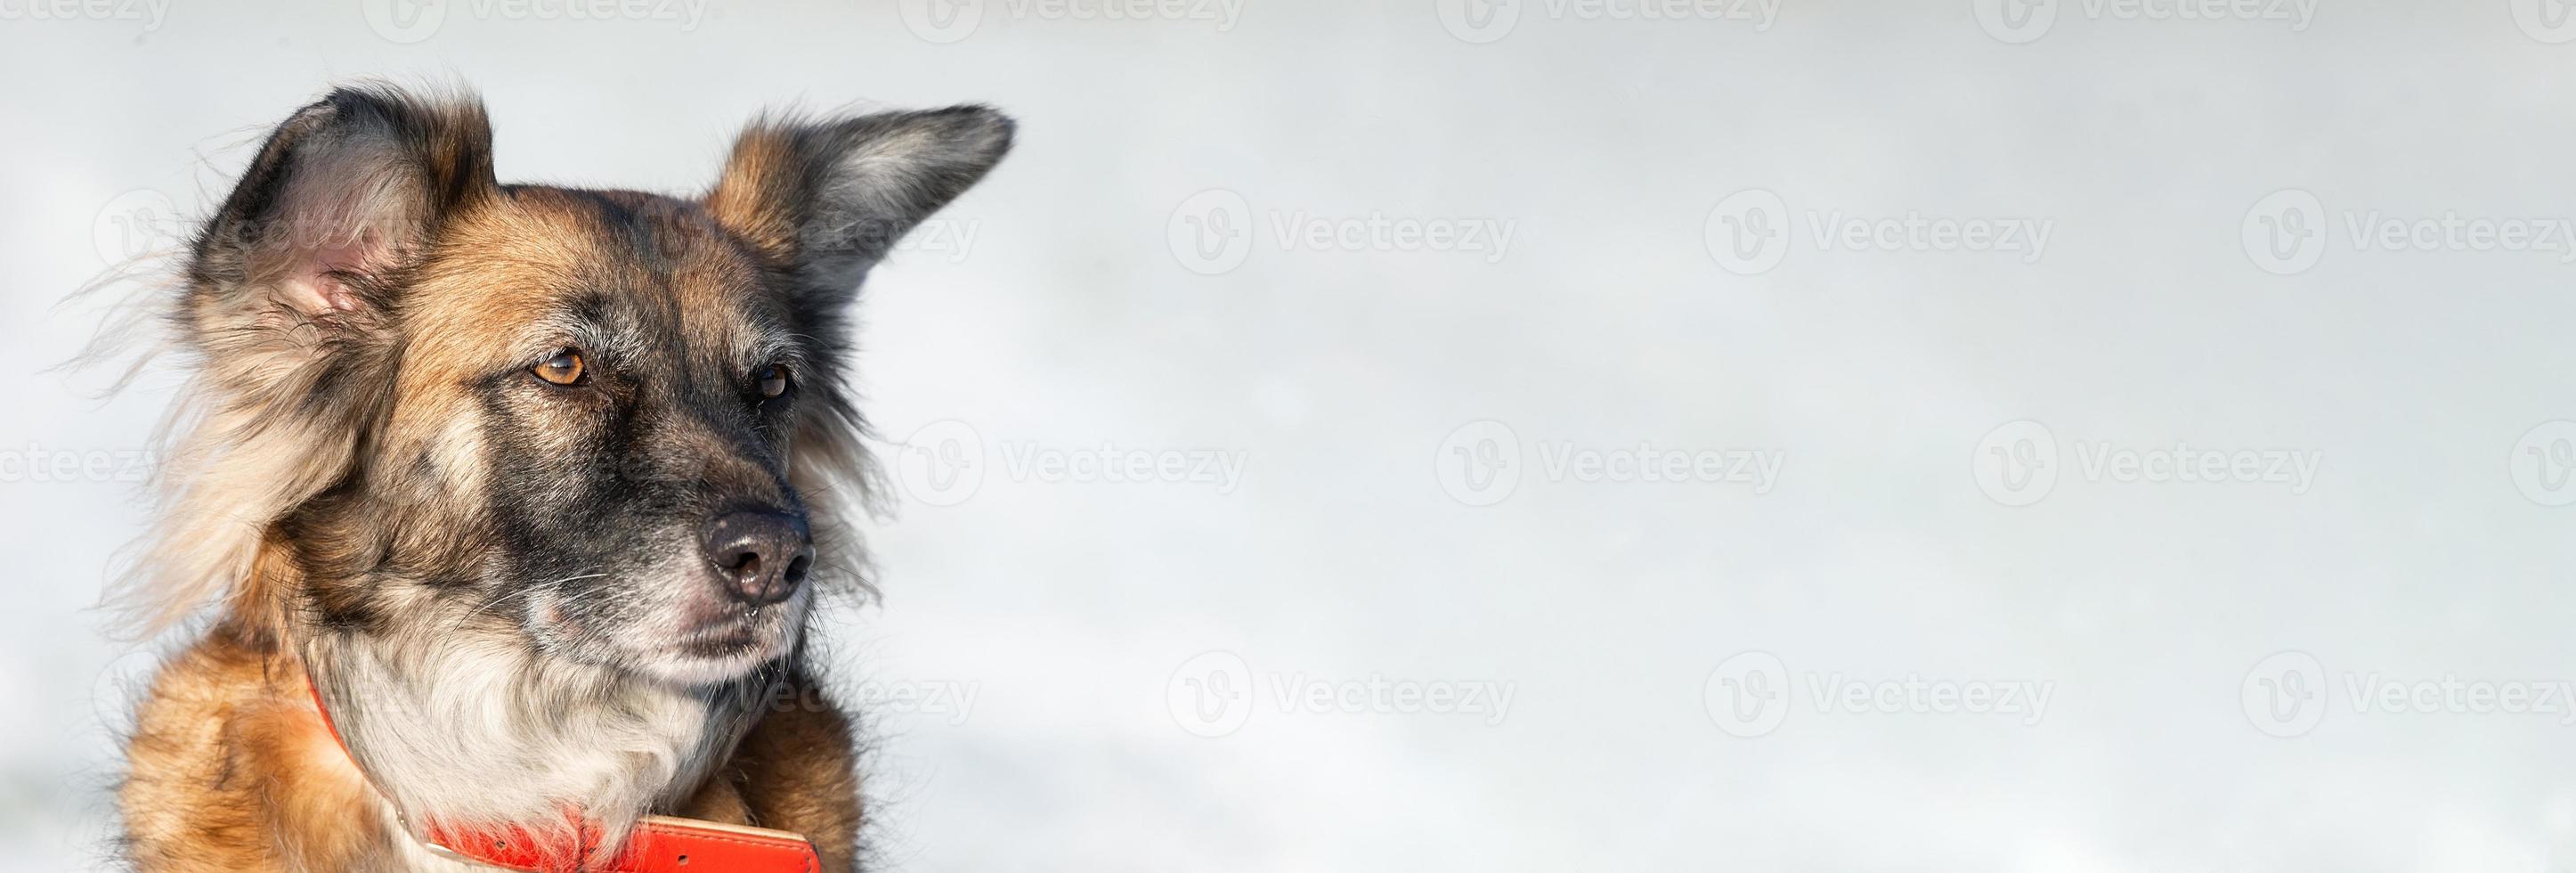 cute red with white dog mongrel on a winter background photo